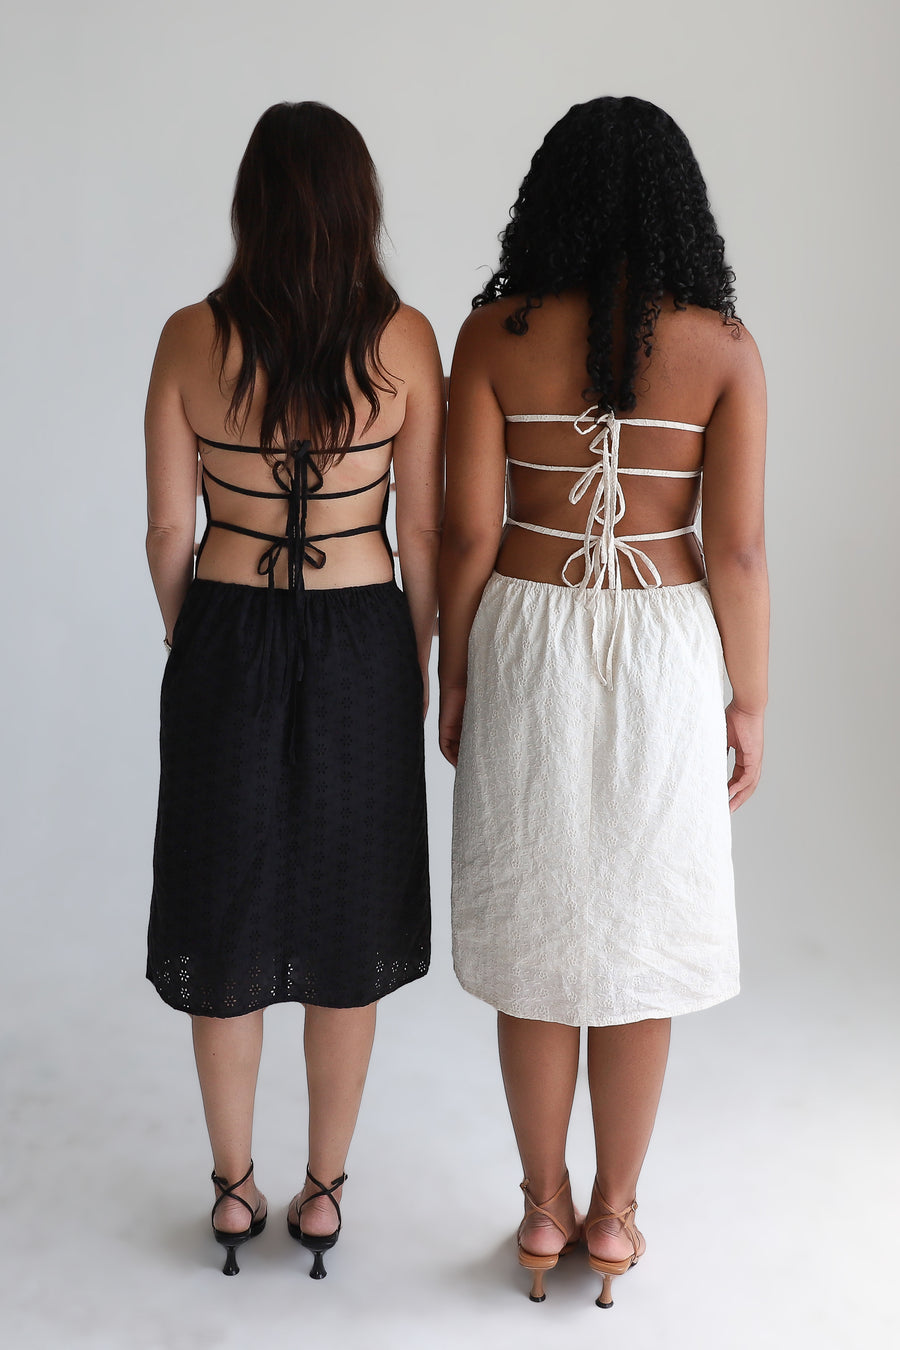 Two models showing the back of the dress.